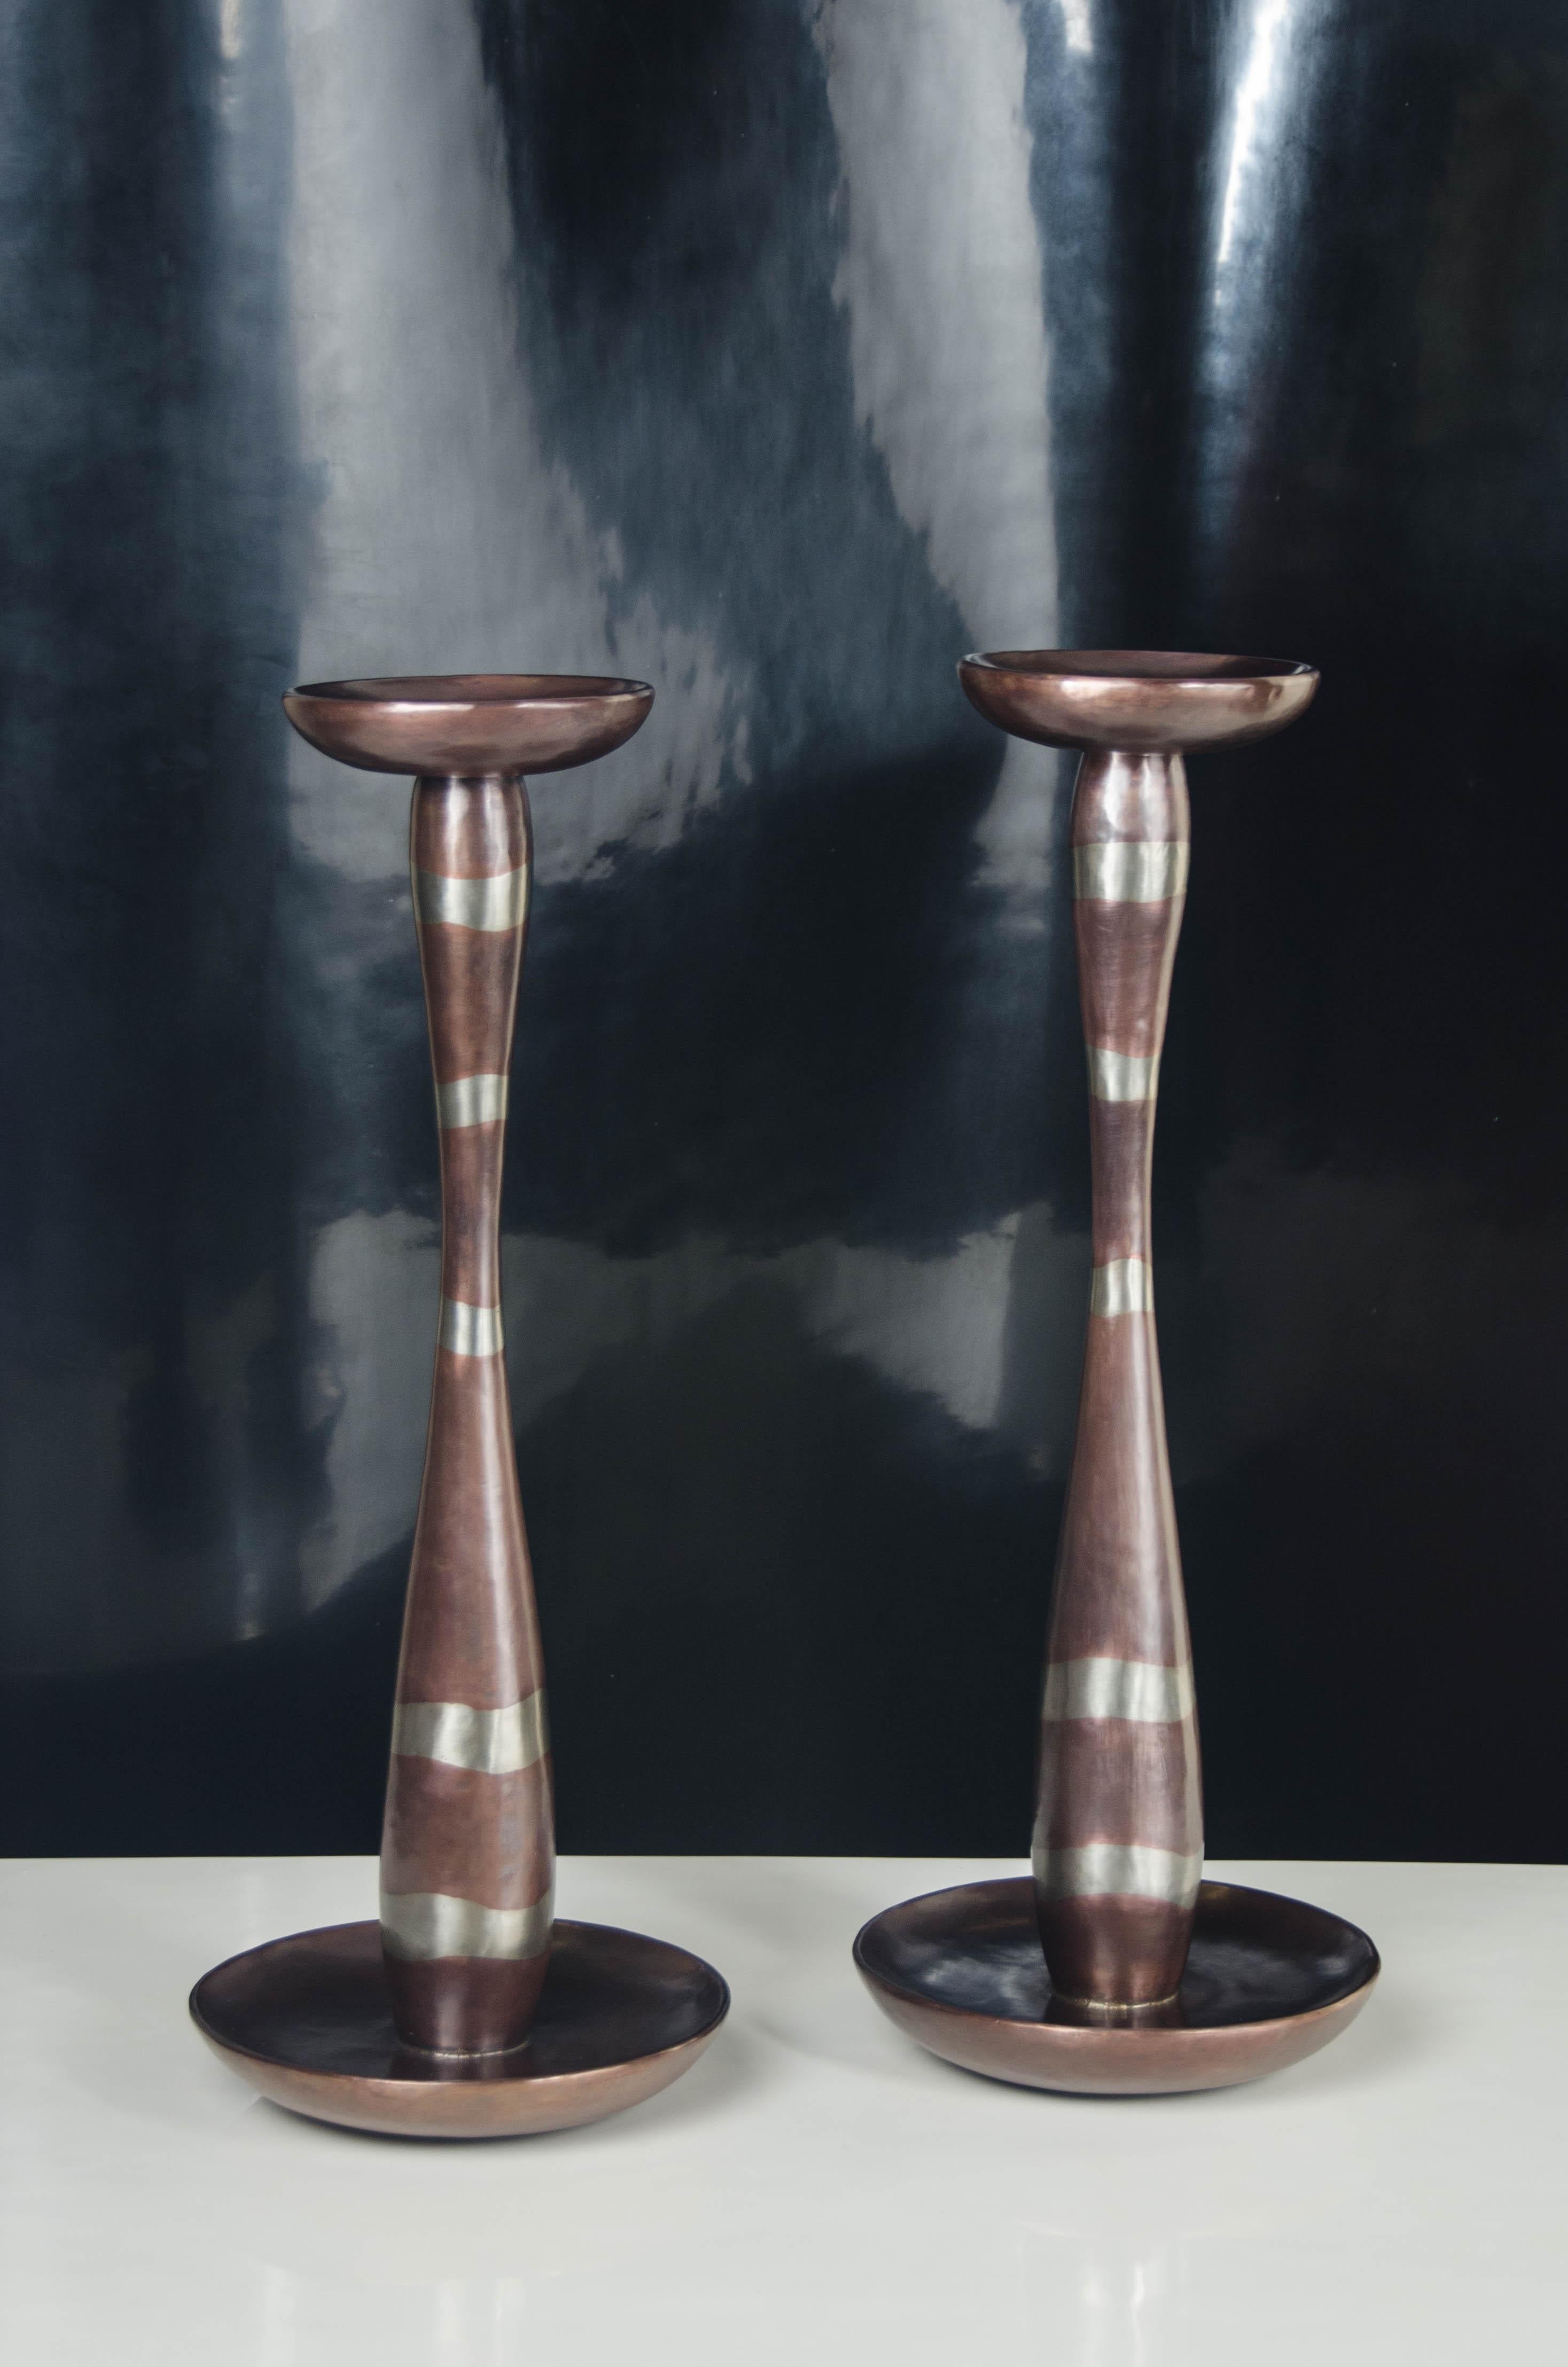 Serpentine Candlestand
Copper
White Bronze
Hand Repoussé
Limited Edition
Each piece is individually crafted and is unique.

Repoussé is the traditional art of hand-hammering decorative relief onto sheet metal. The technique originated around 800 BC